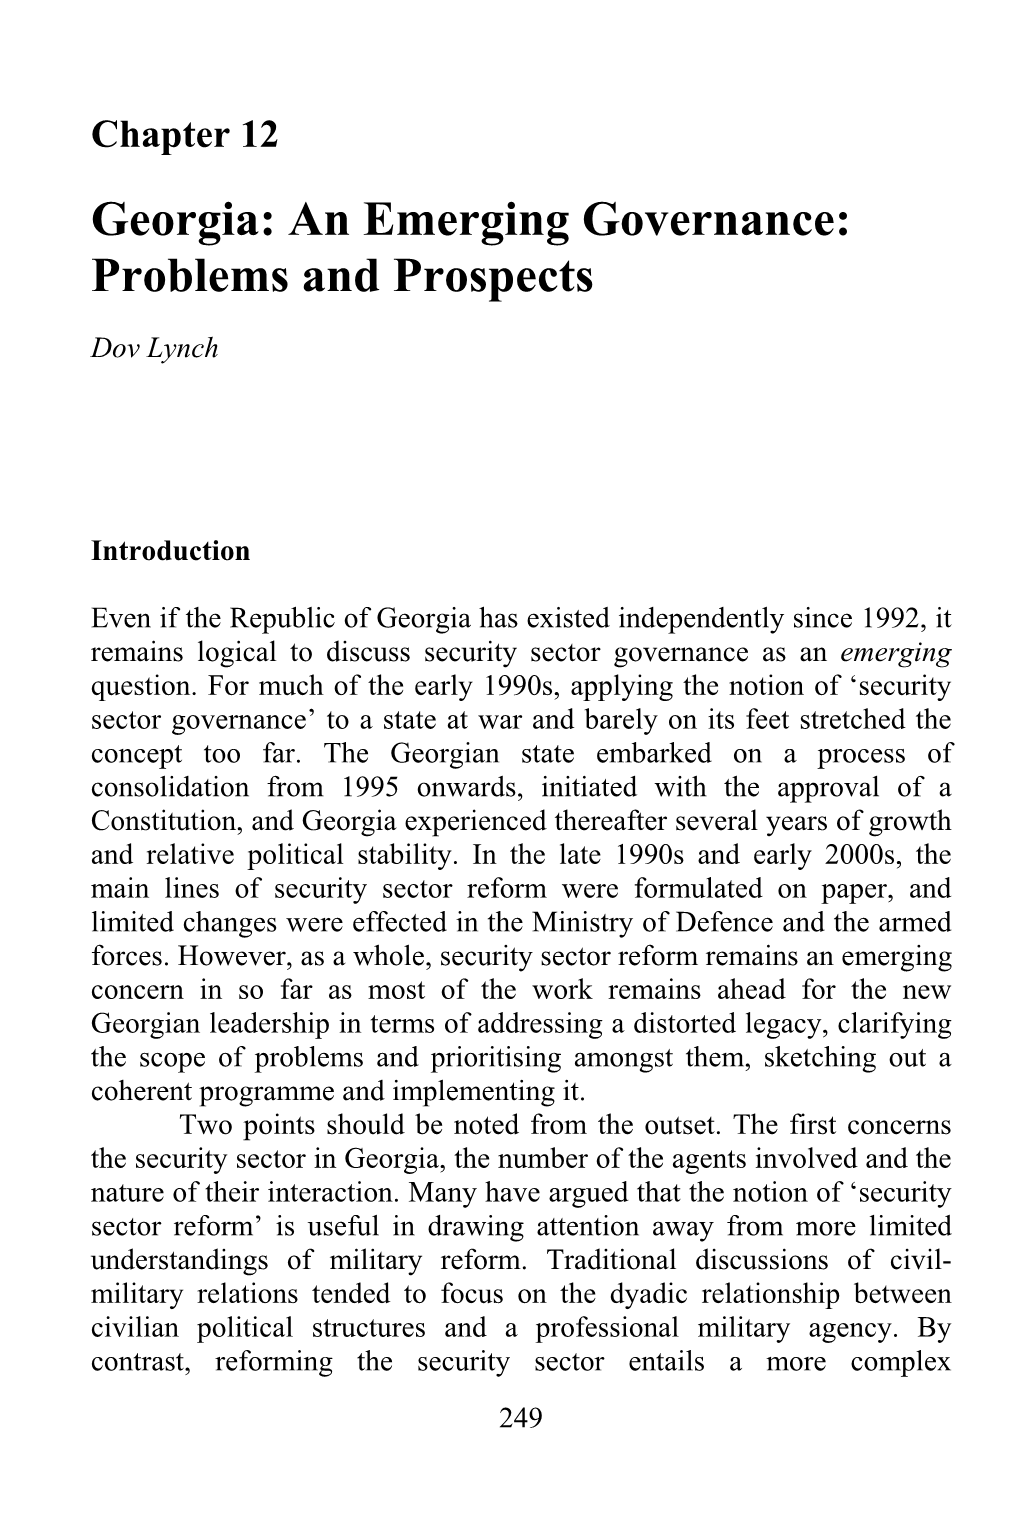 Georgia: an Emerging Governance: Problems and Prospects